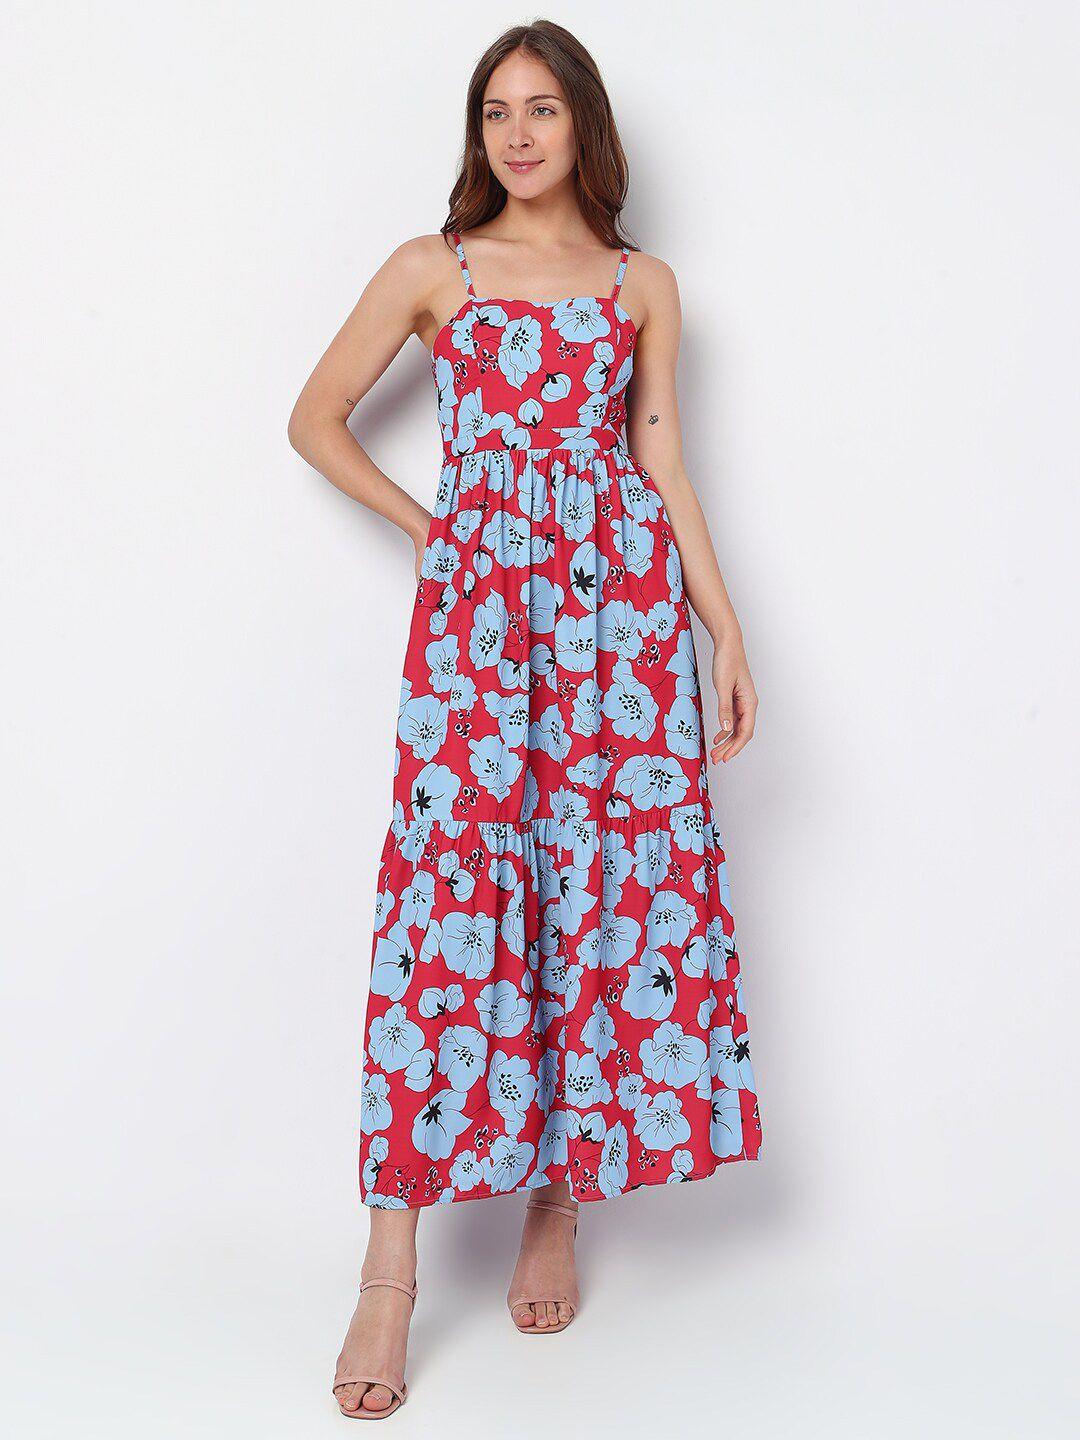 vero moda floral printed tiered fit &flare maxi dress